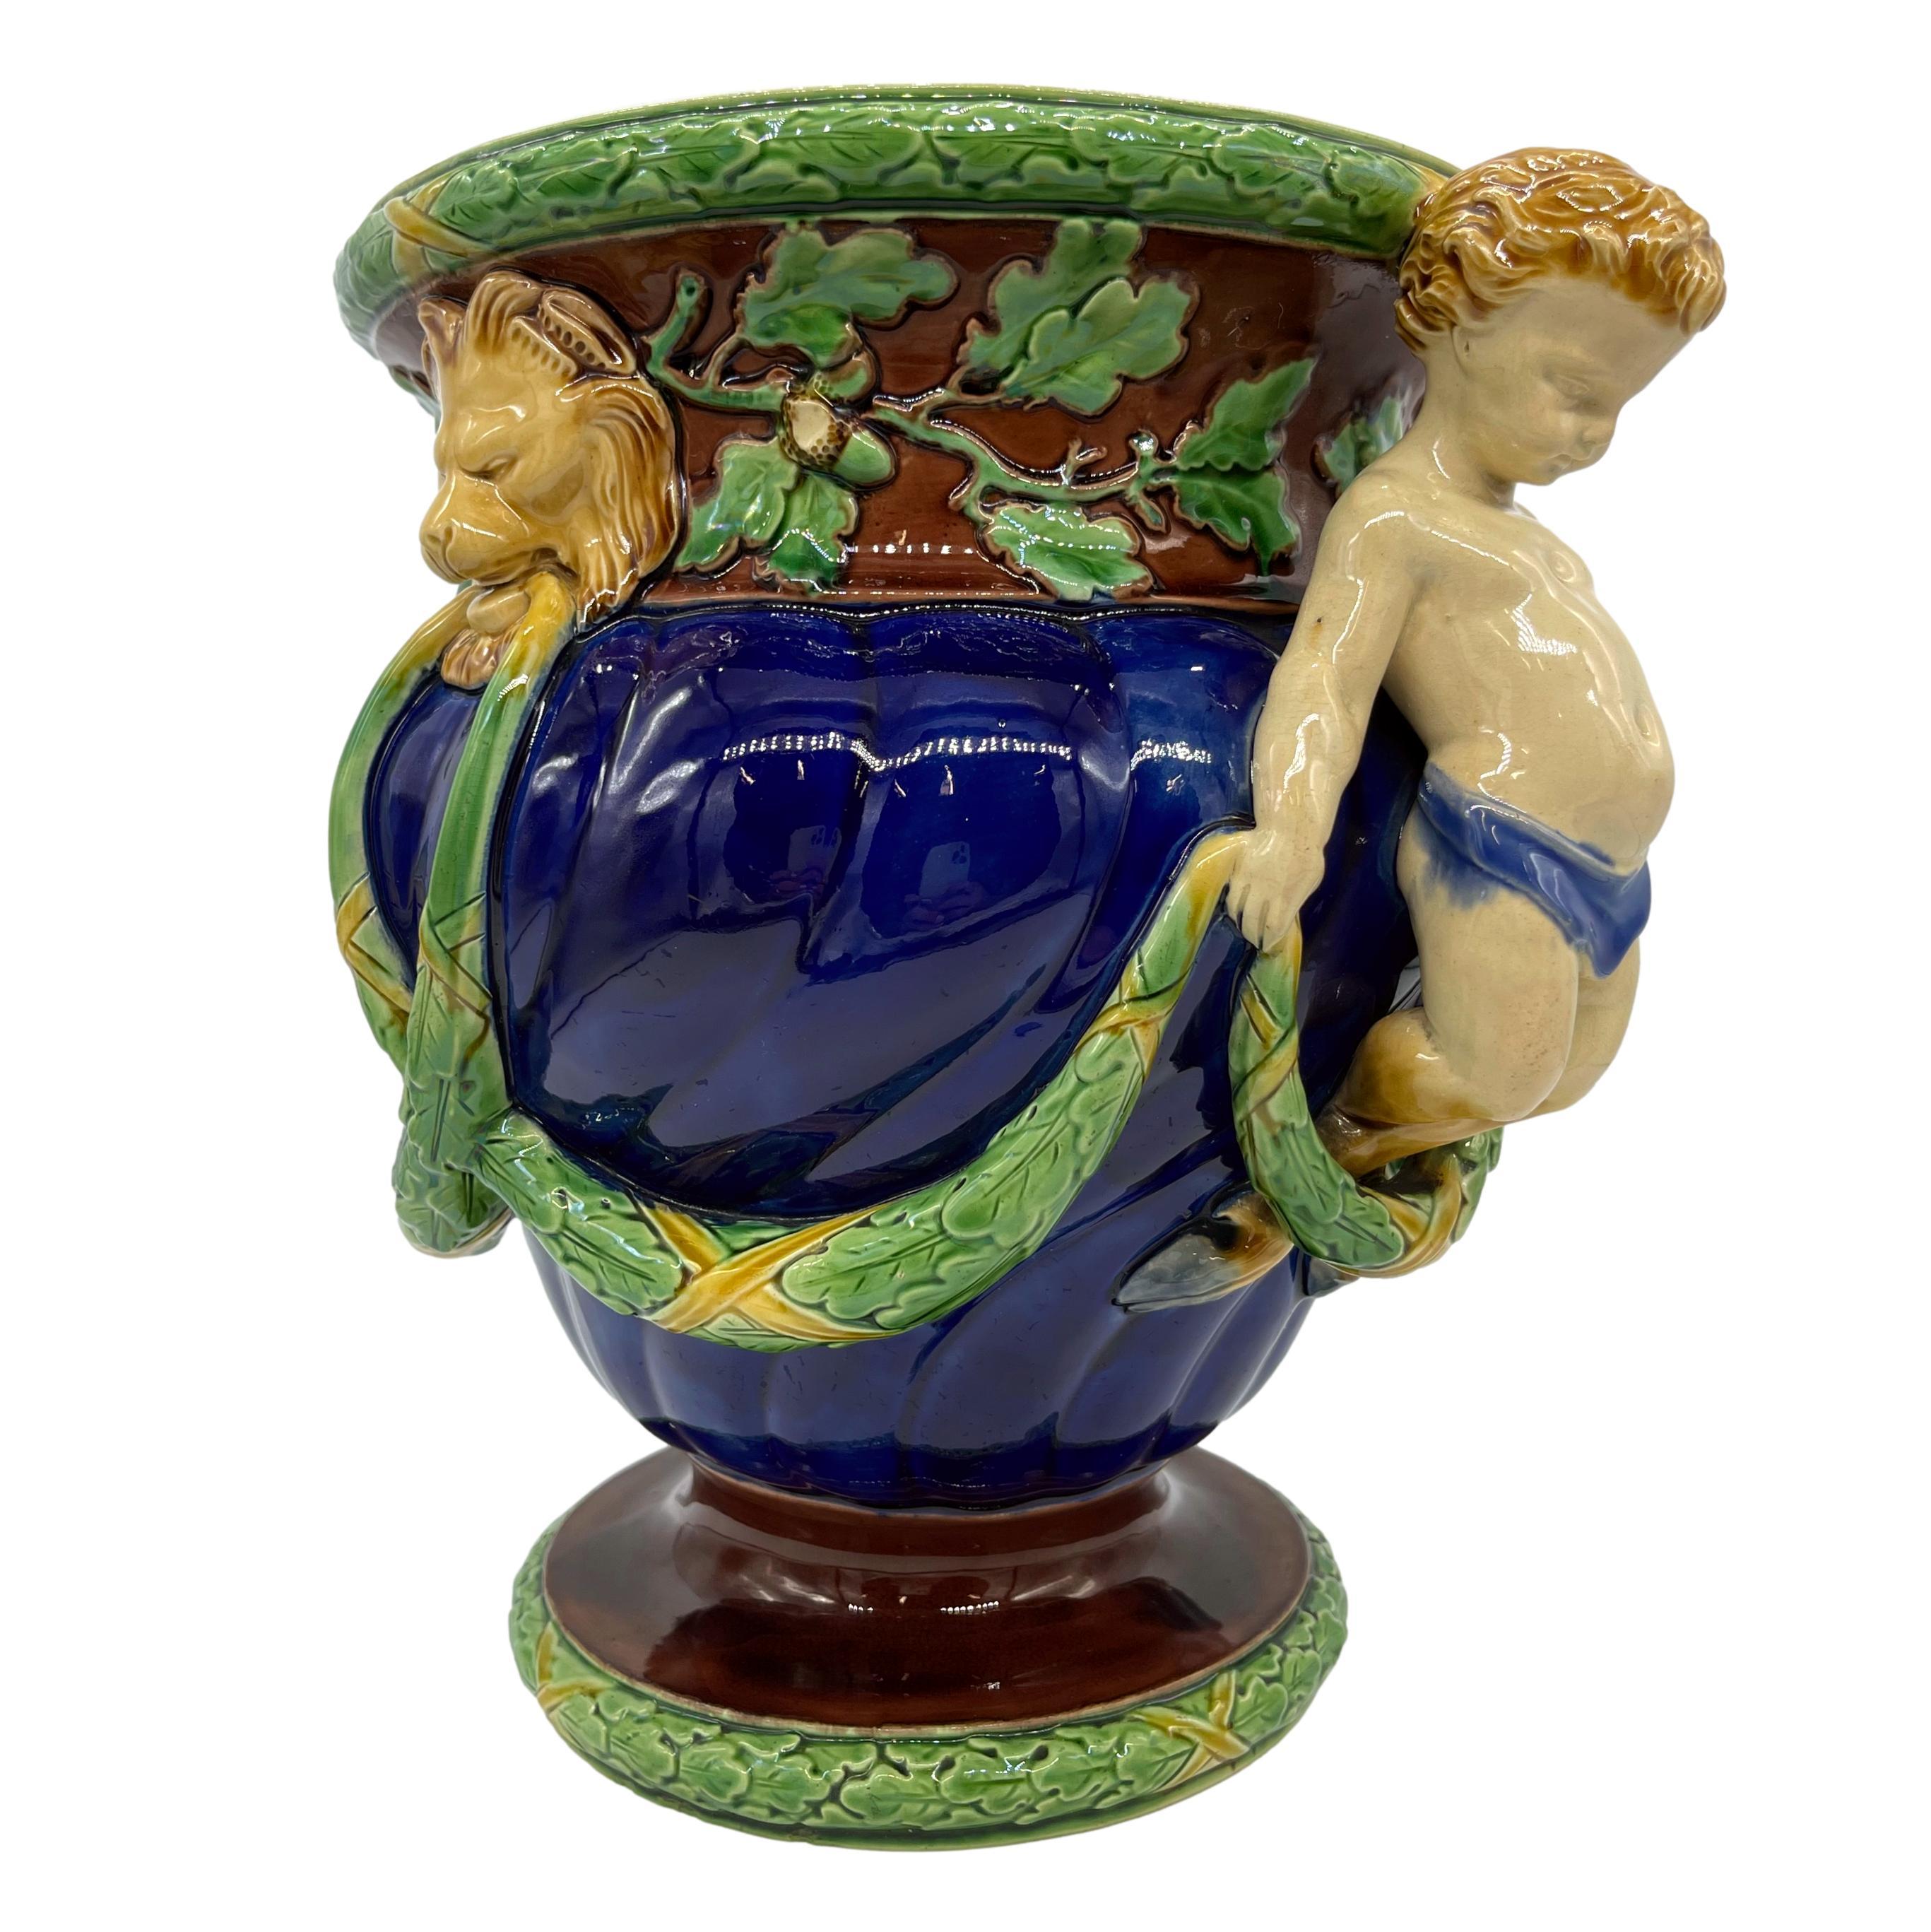 English Minton Majolica Wine Cooler with Fauns, Oak Garlands on Cobalt, Dated 1865